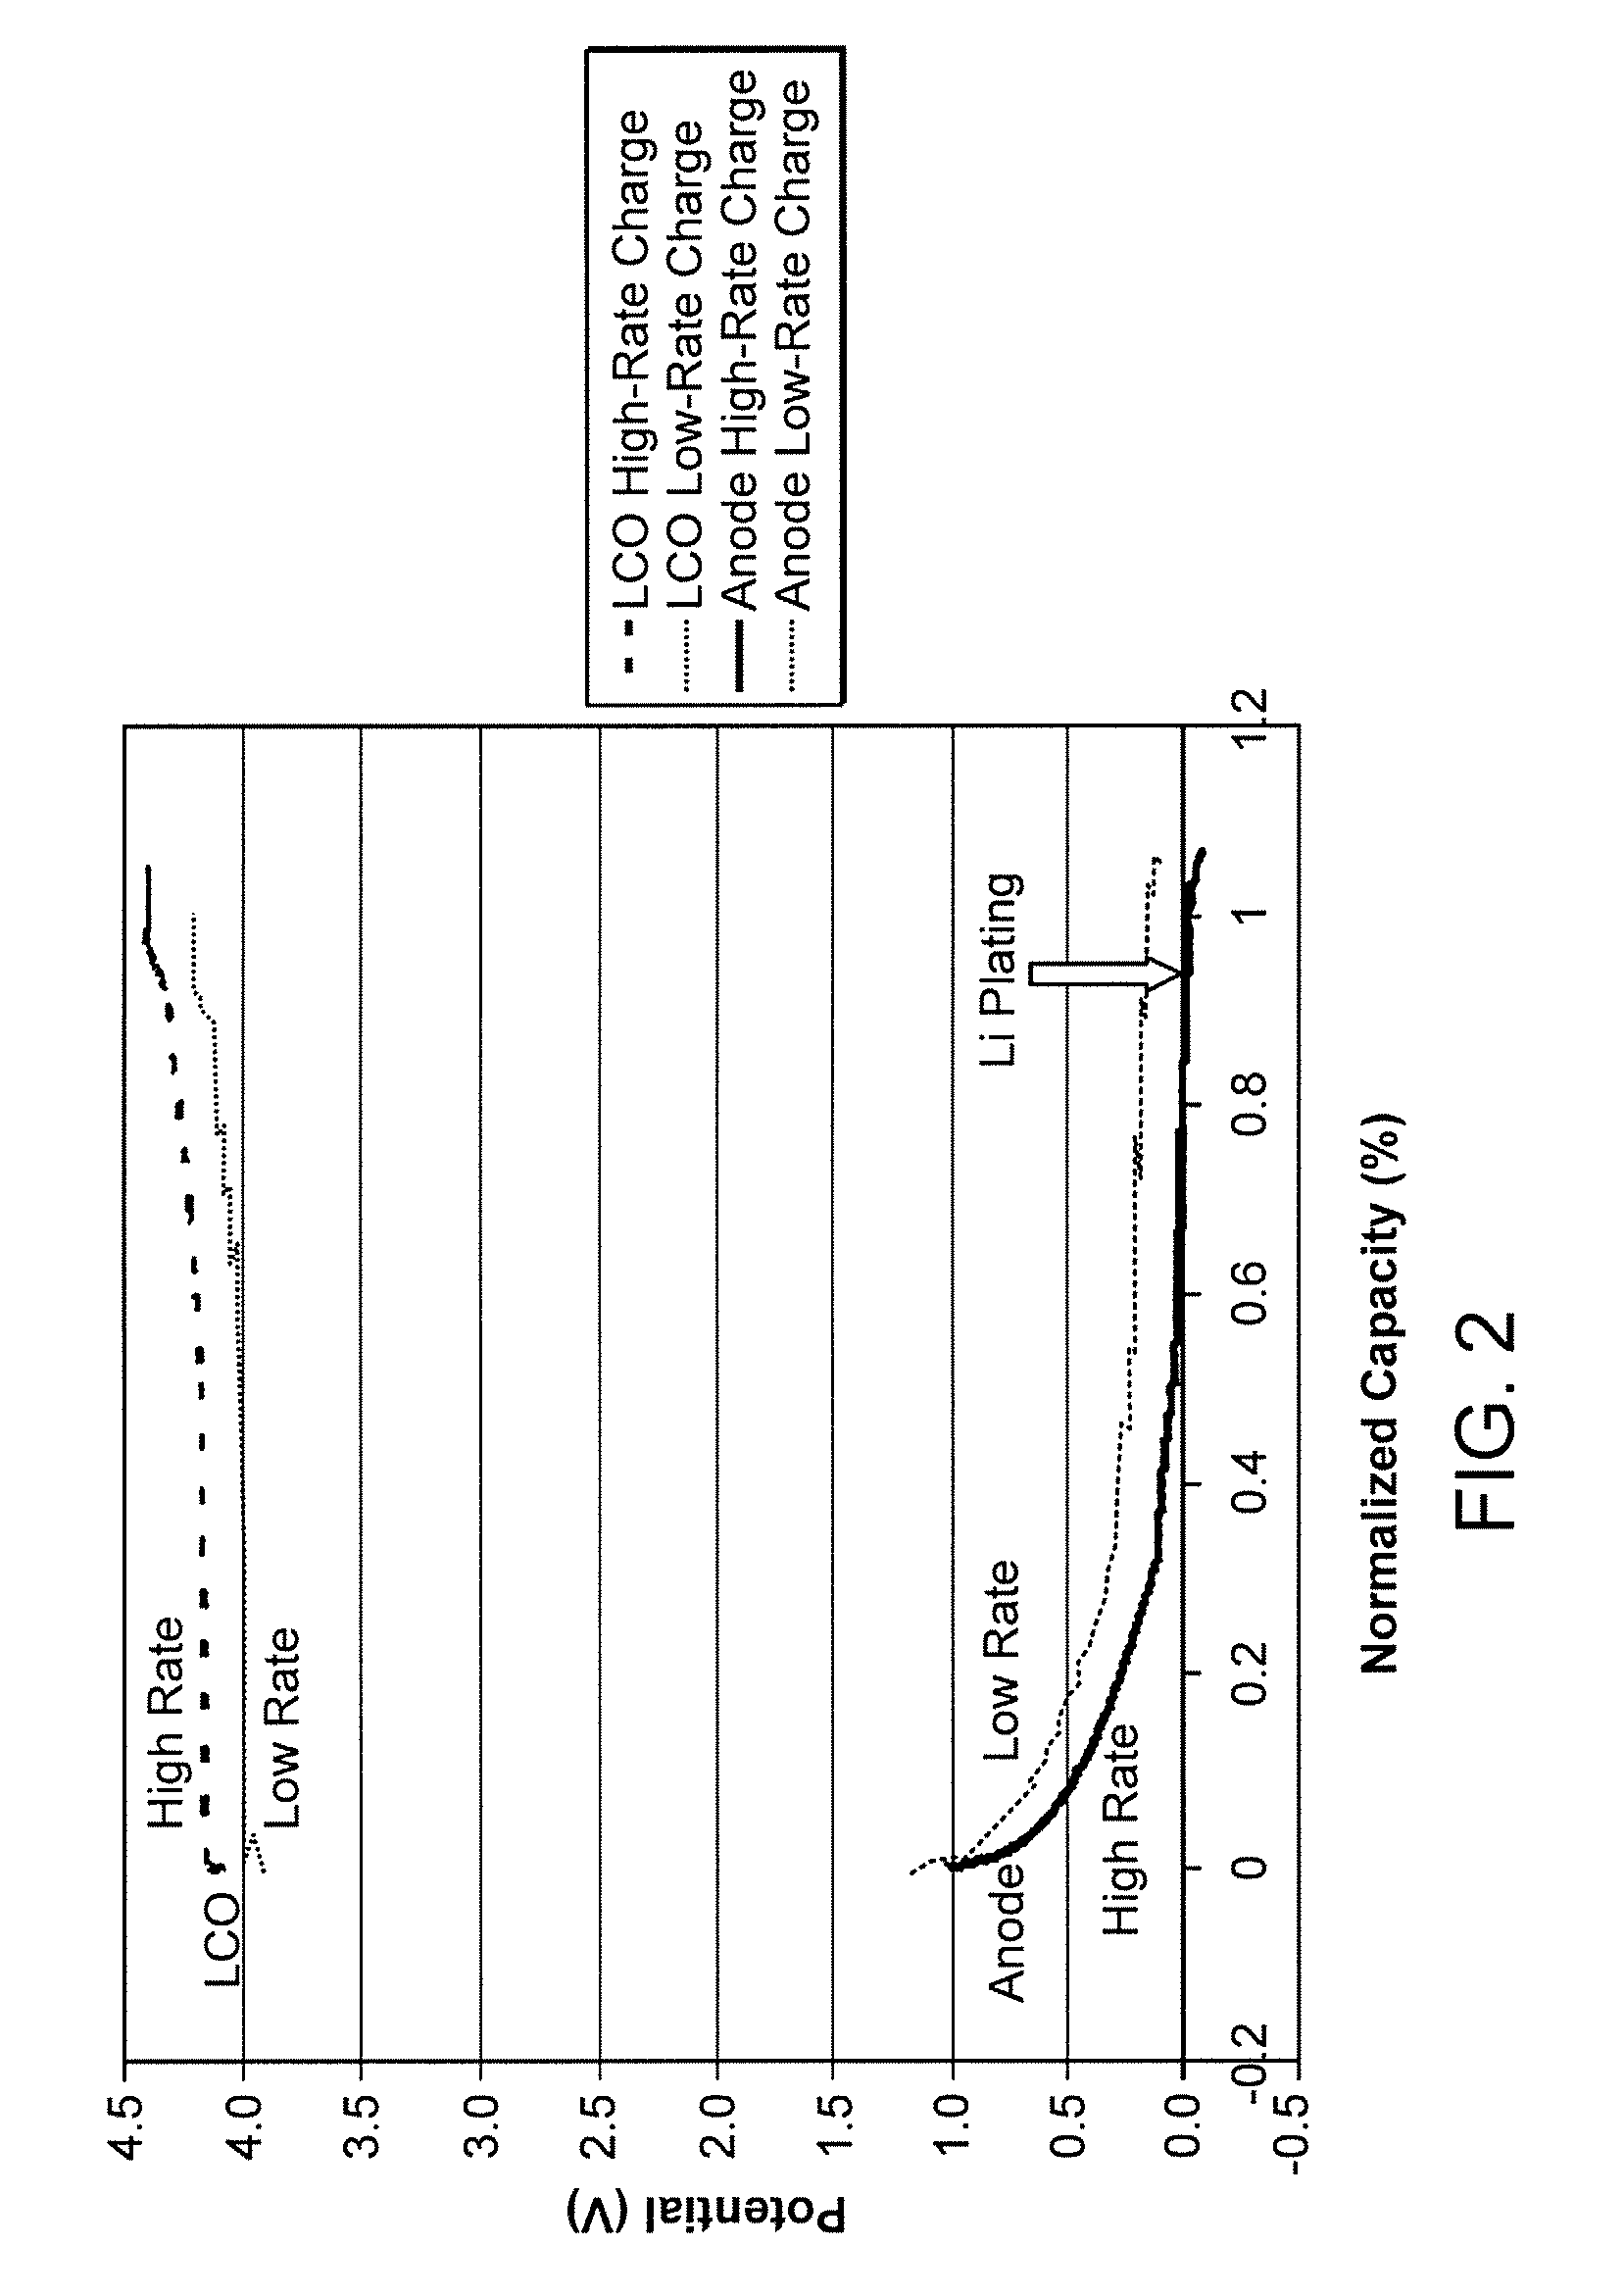 Lithium secondary cell with high charge and discharge rate capability and low impedance growth